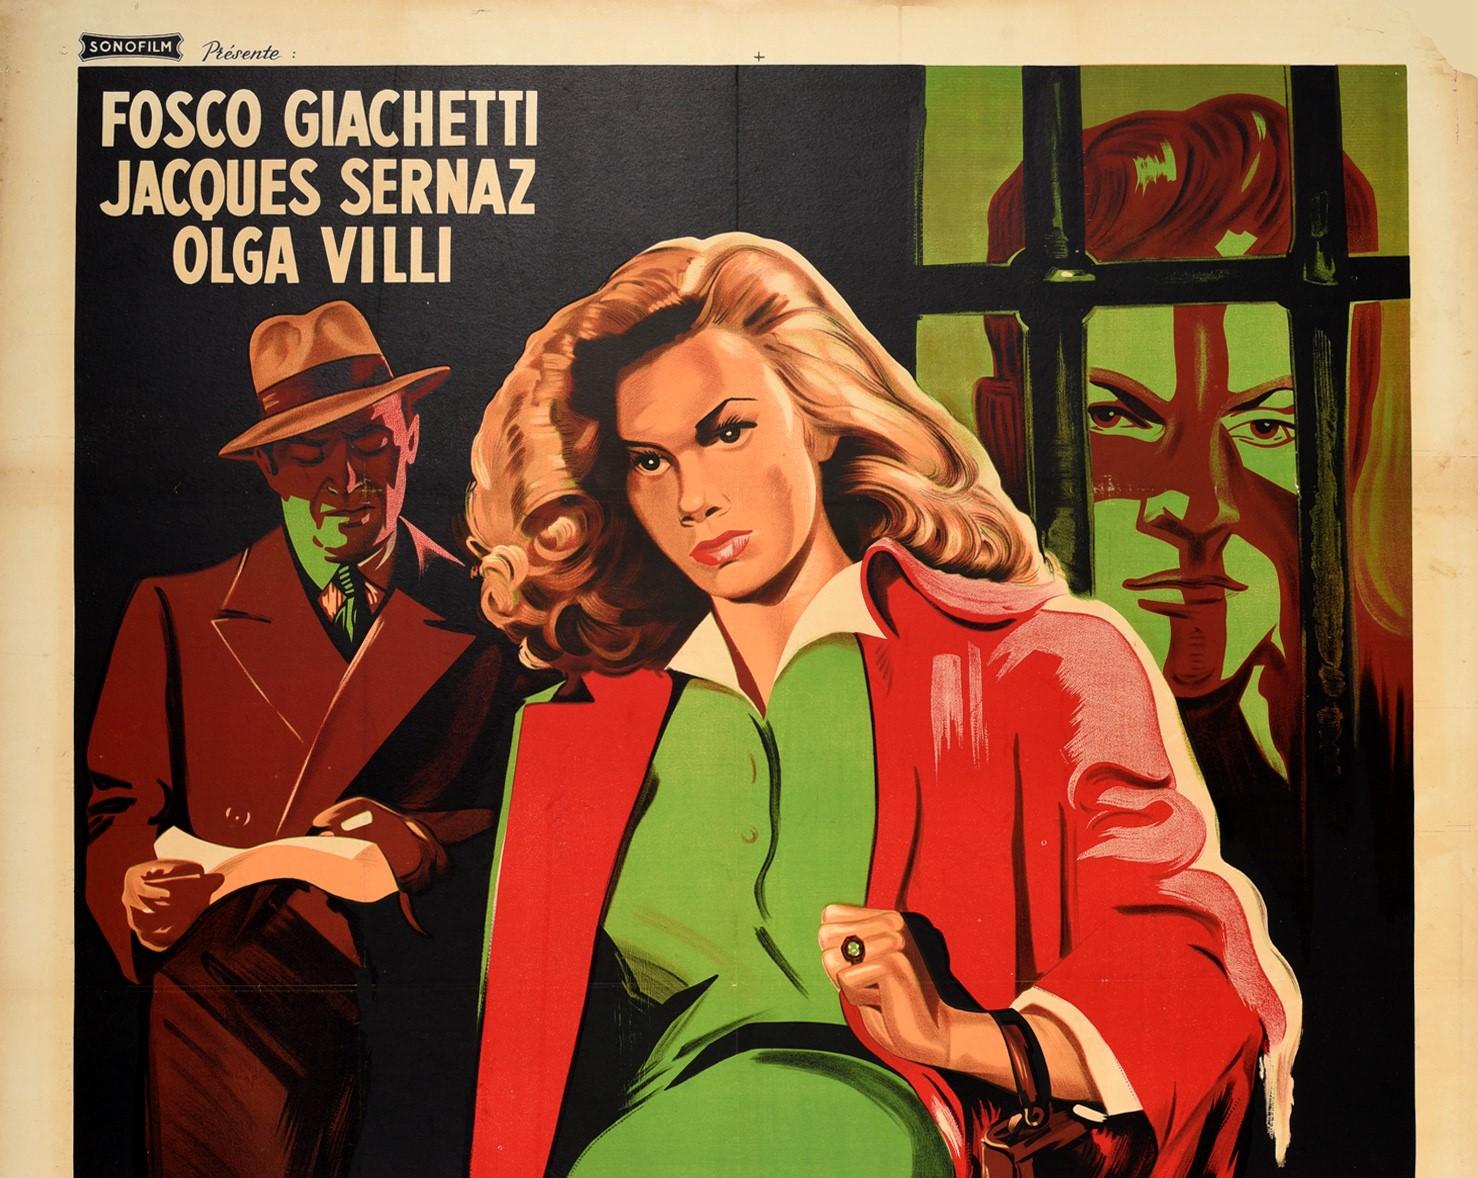 Original vintage French film poster for a 1948 Italian drama movie Una Lettera All'Alba / Cocaïne (A Letter At Dawn / Cocaine) issued by Sonofilm, directed by Giorgio Bianchi and starring Fosco Giachetti as the drug trafficker Carlo Marini, Jaques